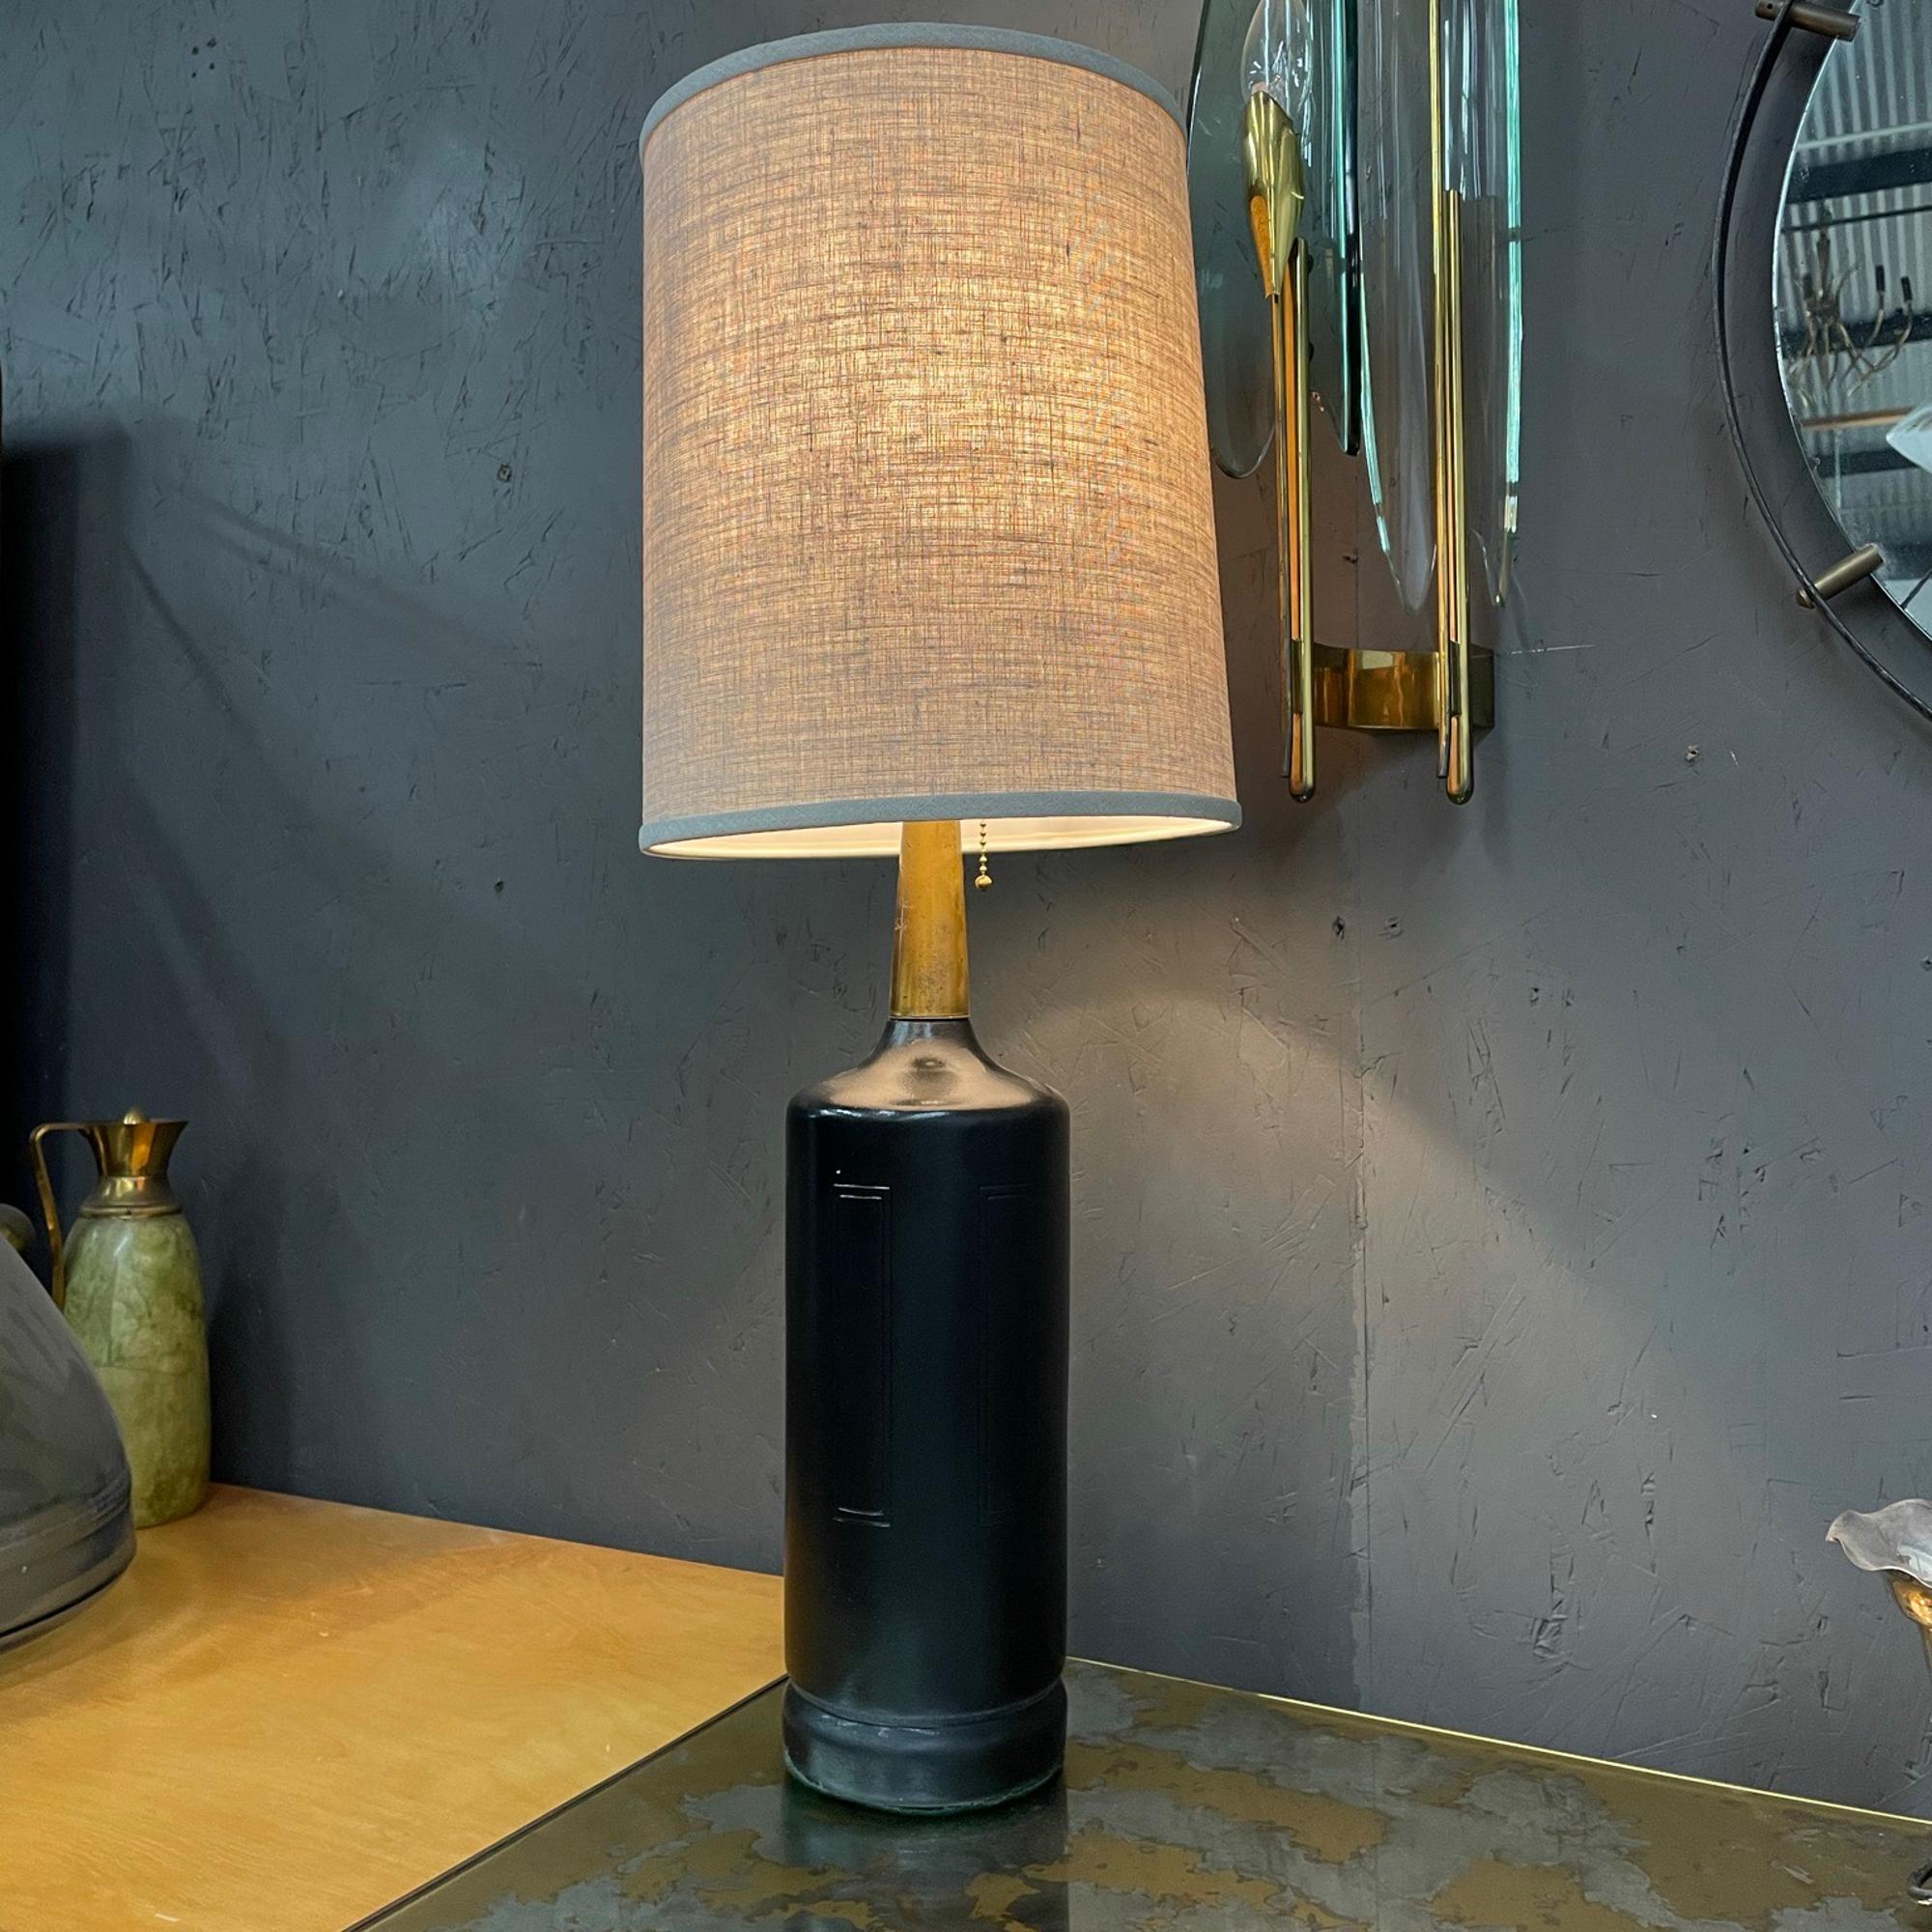 For your consideration an elegant Mid-Century Modern table lamp black and gold.
Made in the USA circa the 1970s. Clean modern cylinder design in black semi-gloss finish. Top section has a brass cone with original vintage unrestored patina. 

No